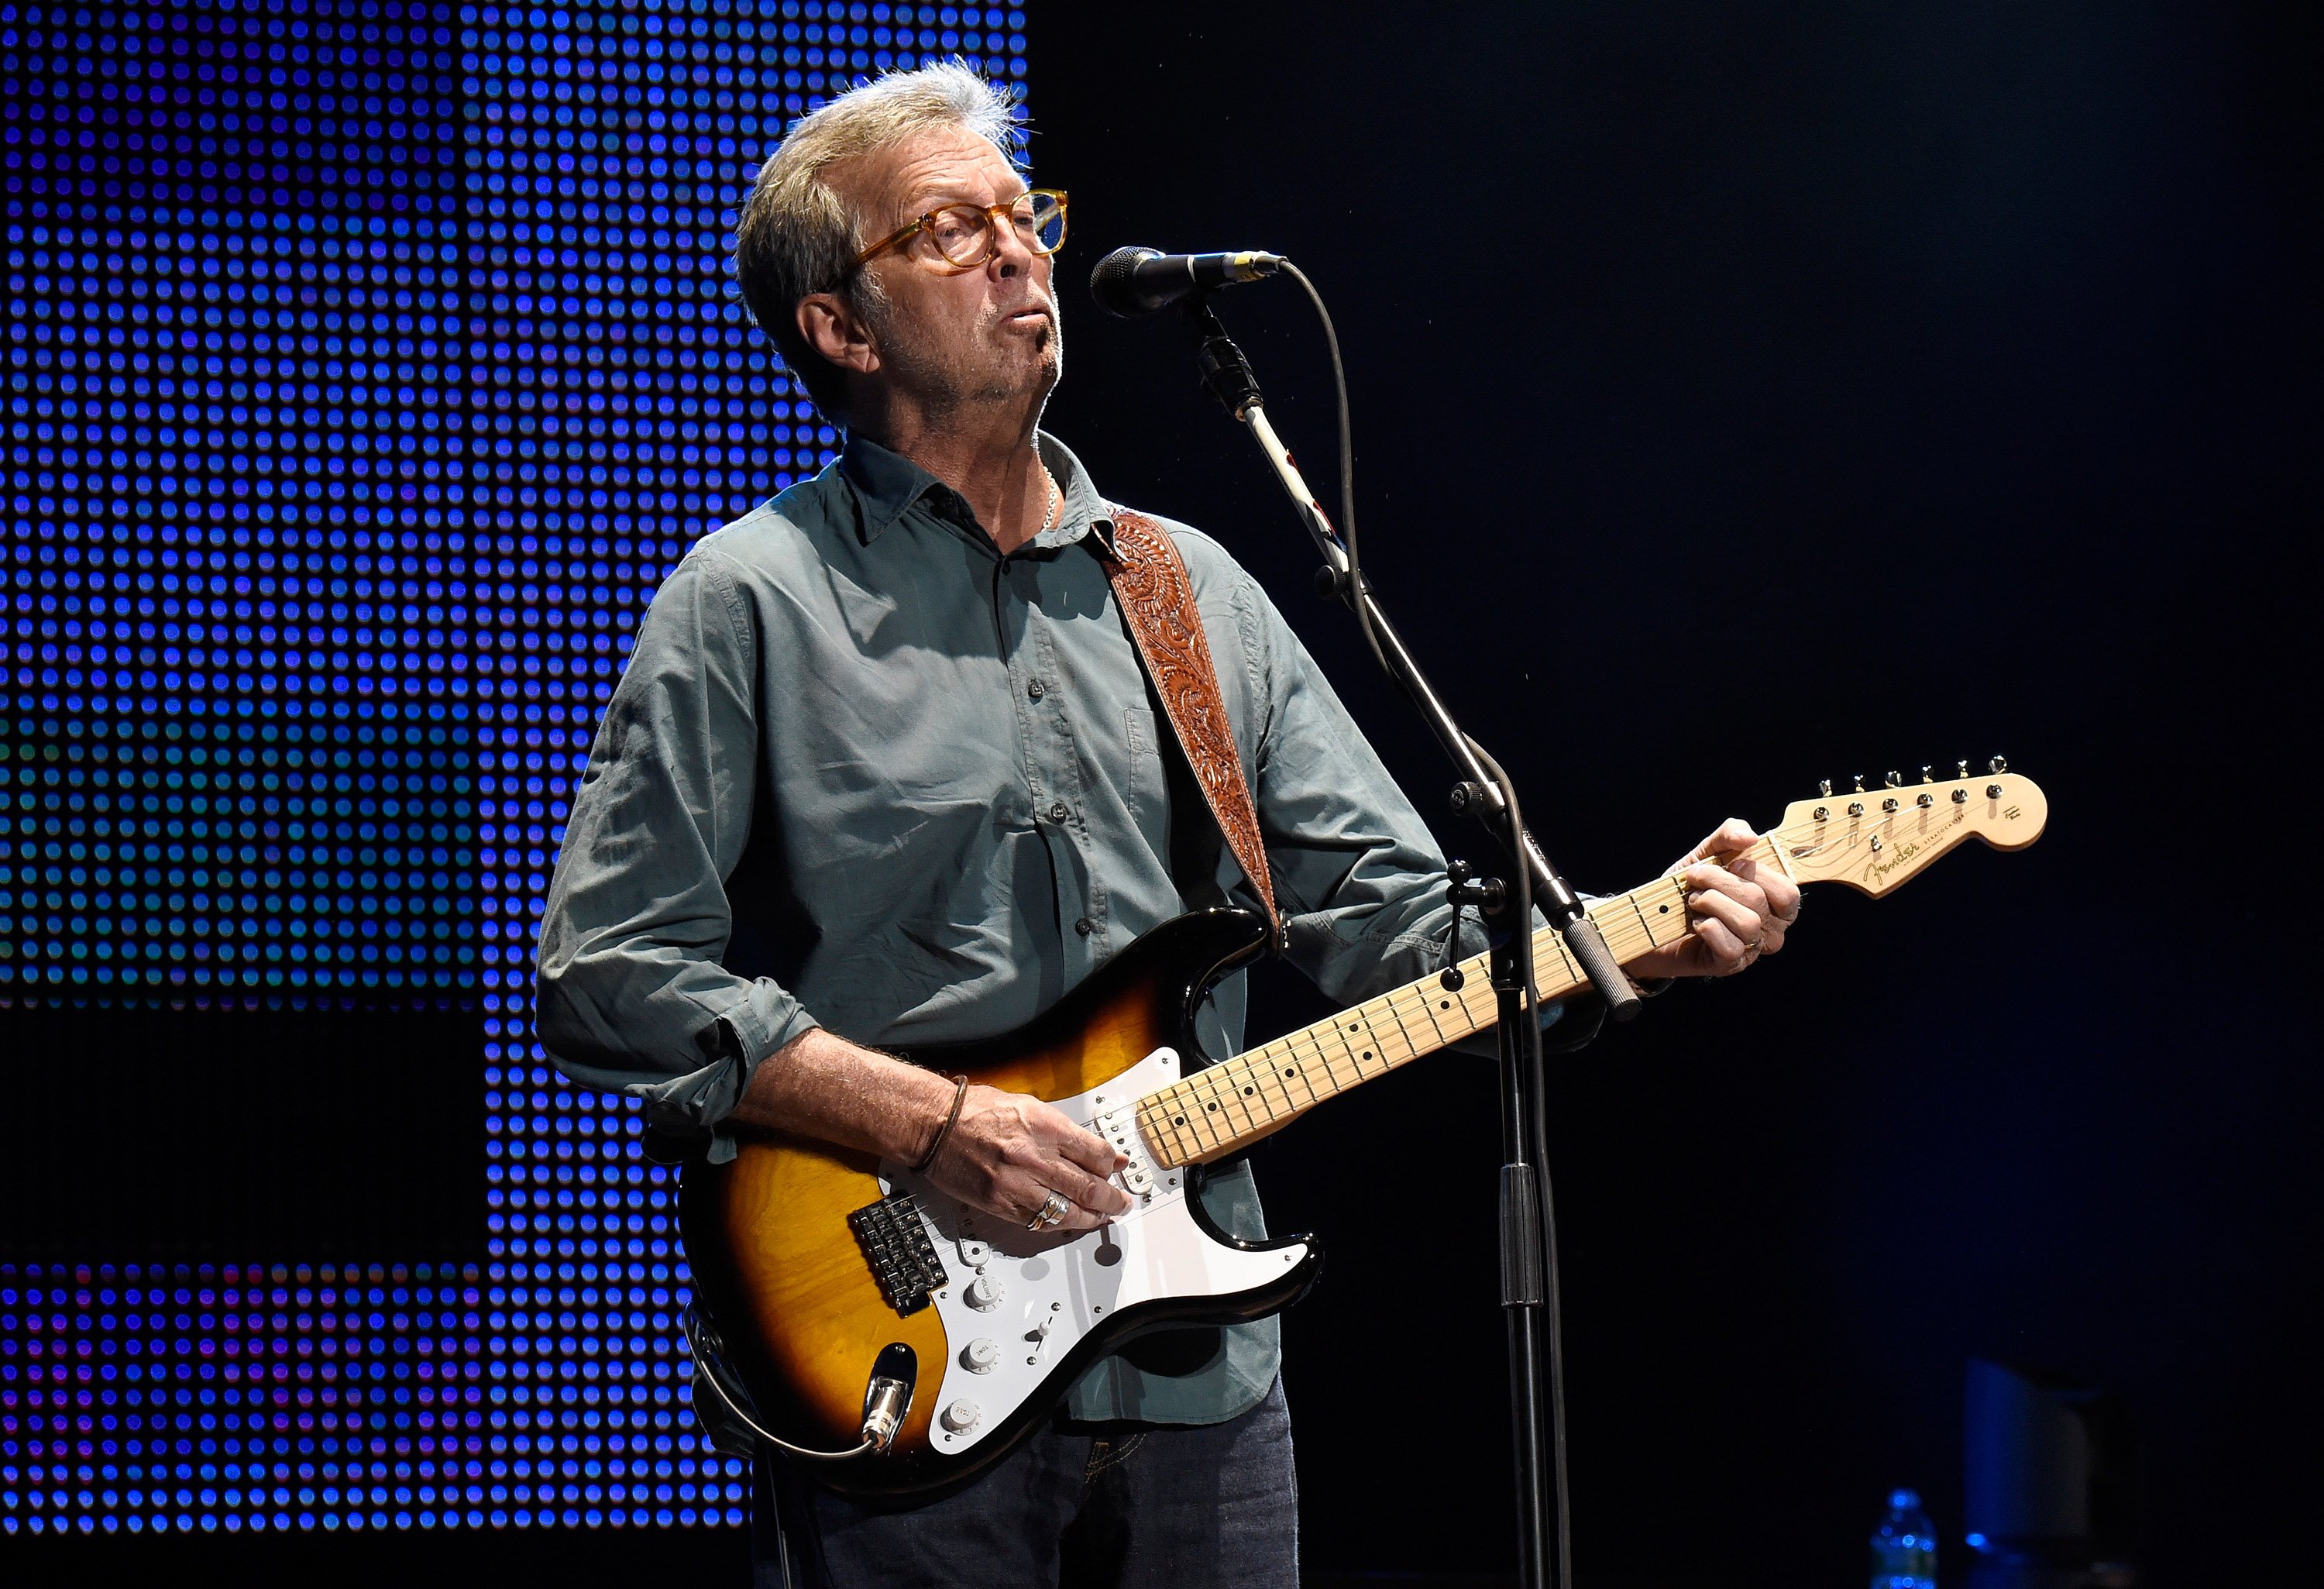 Eric Clapton performs onstage during his 70th Birthday Concert Celebration at Madison Square Garden on May 1, 2015 in New York City. | Source: Getty Images